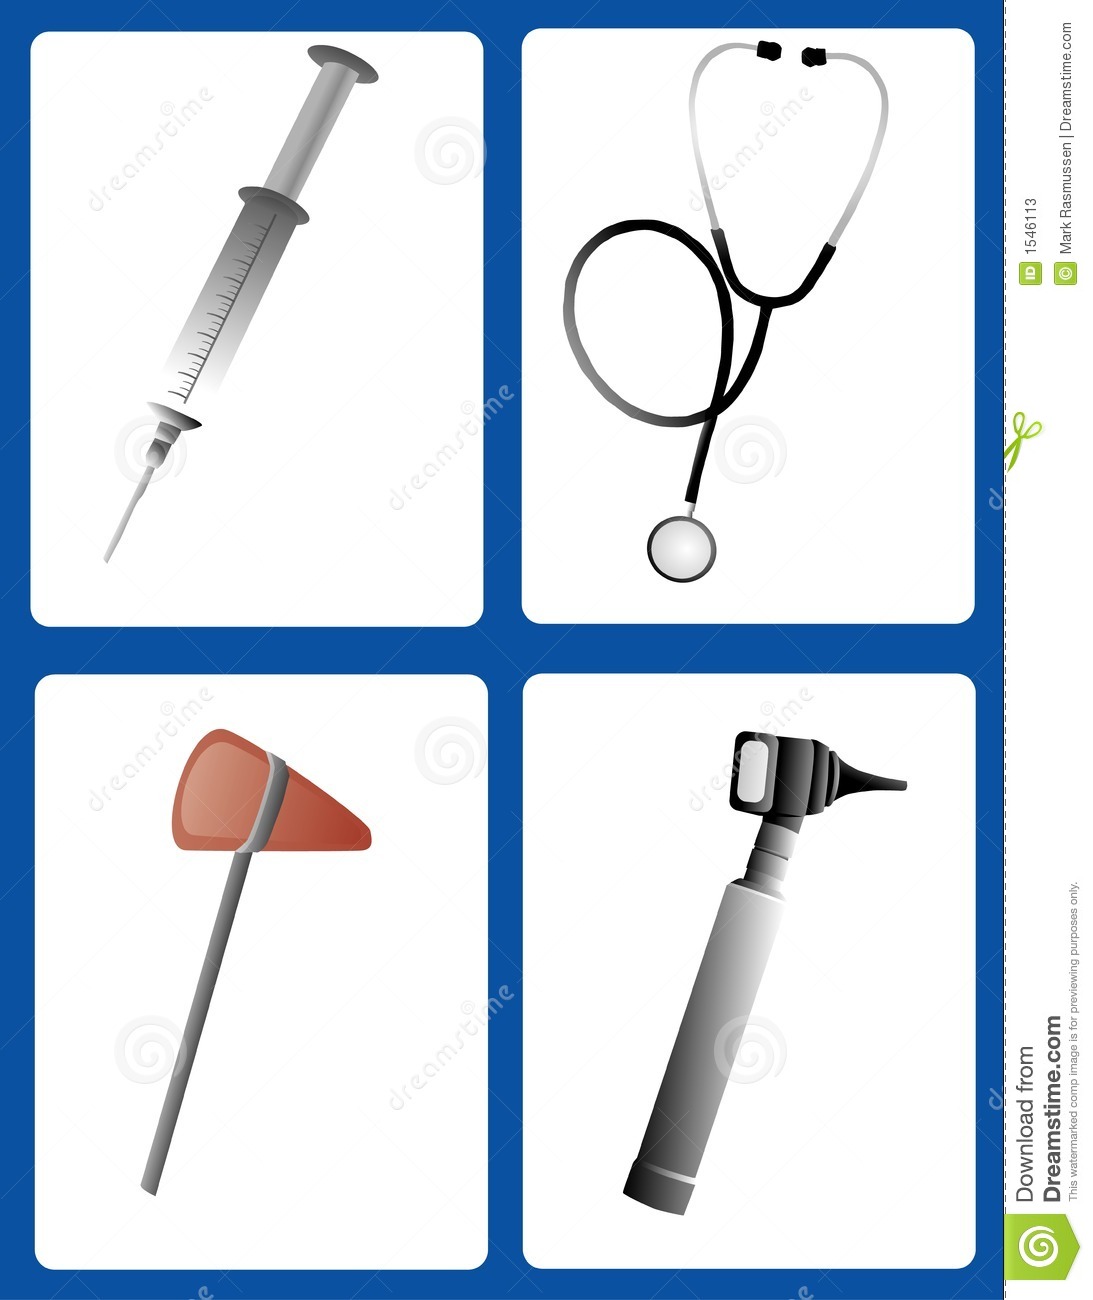 Illustration Of Various Doctors Tools Including An Otoscope Syringe